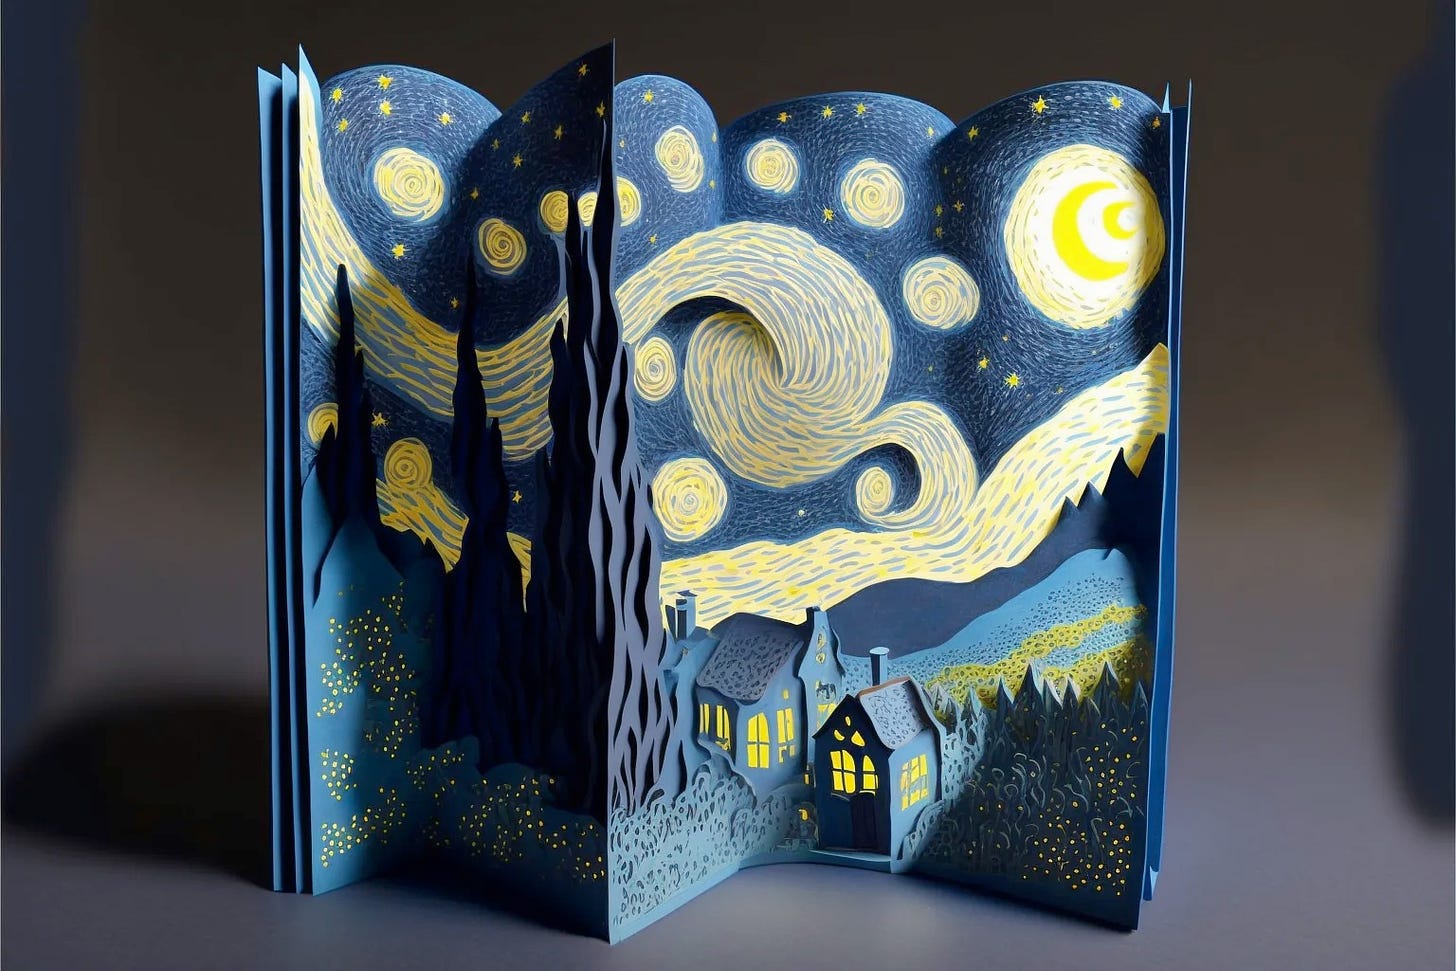 Simulated photo of a pop up book of art by Van Gogh